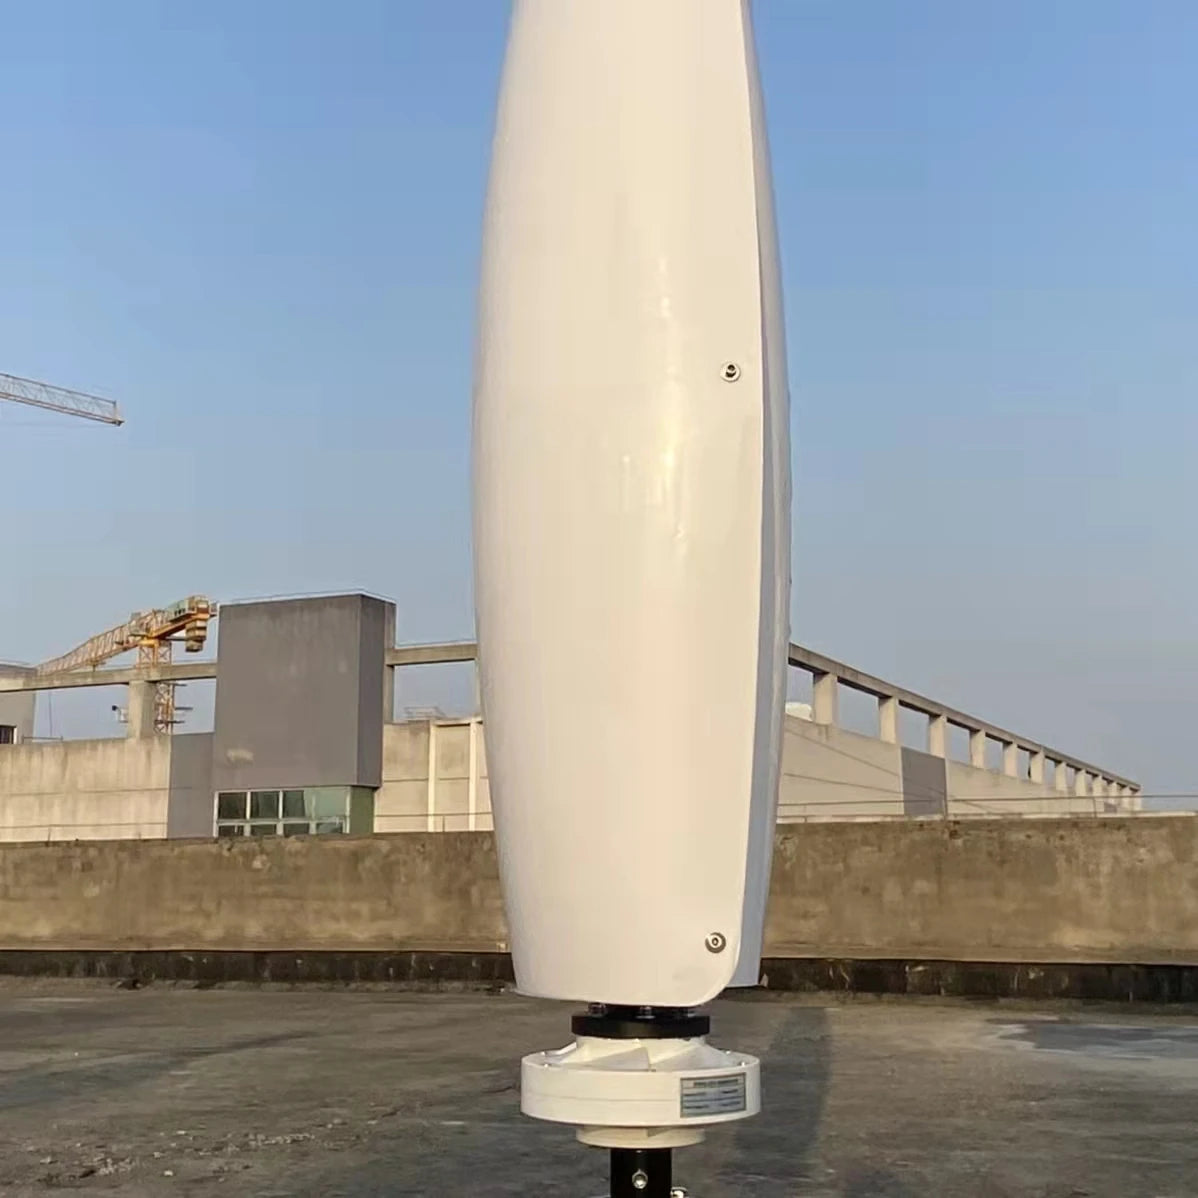 A mazon eBay WindMill Power Free Energy Generator Roof Wind Turbine 1000w 2000w Voltage 24V 48V 2 Blades With MPPT Controller